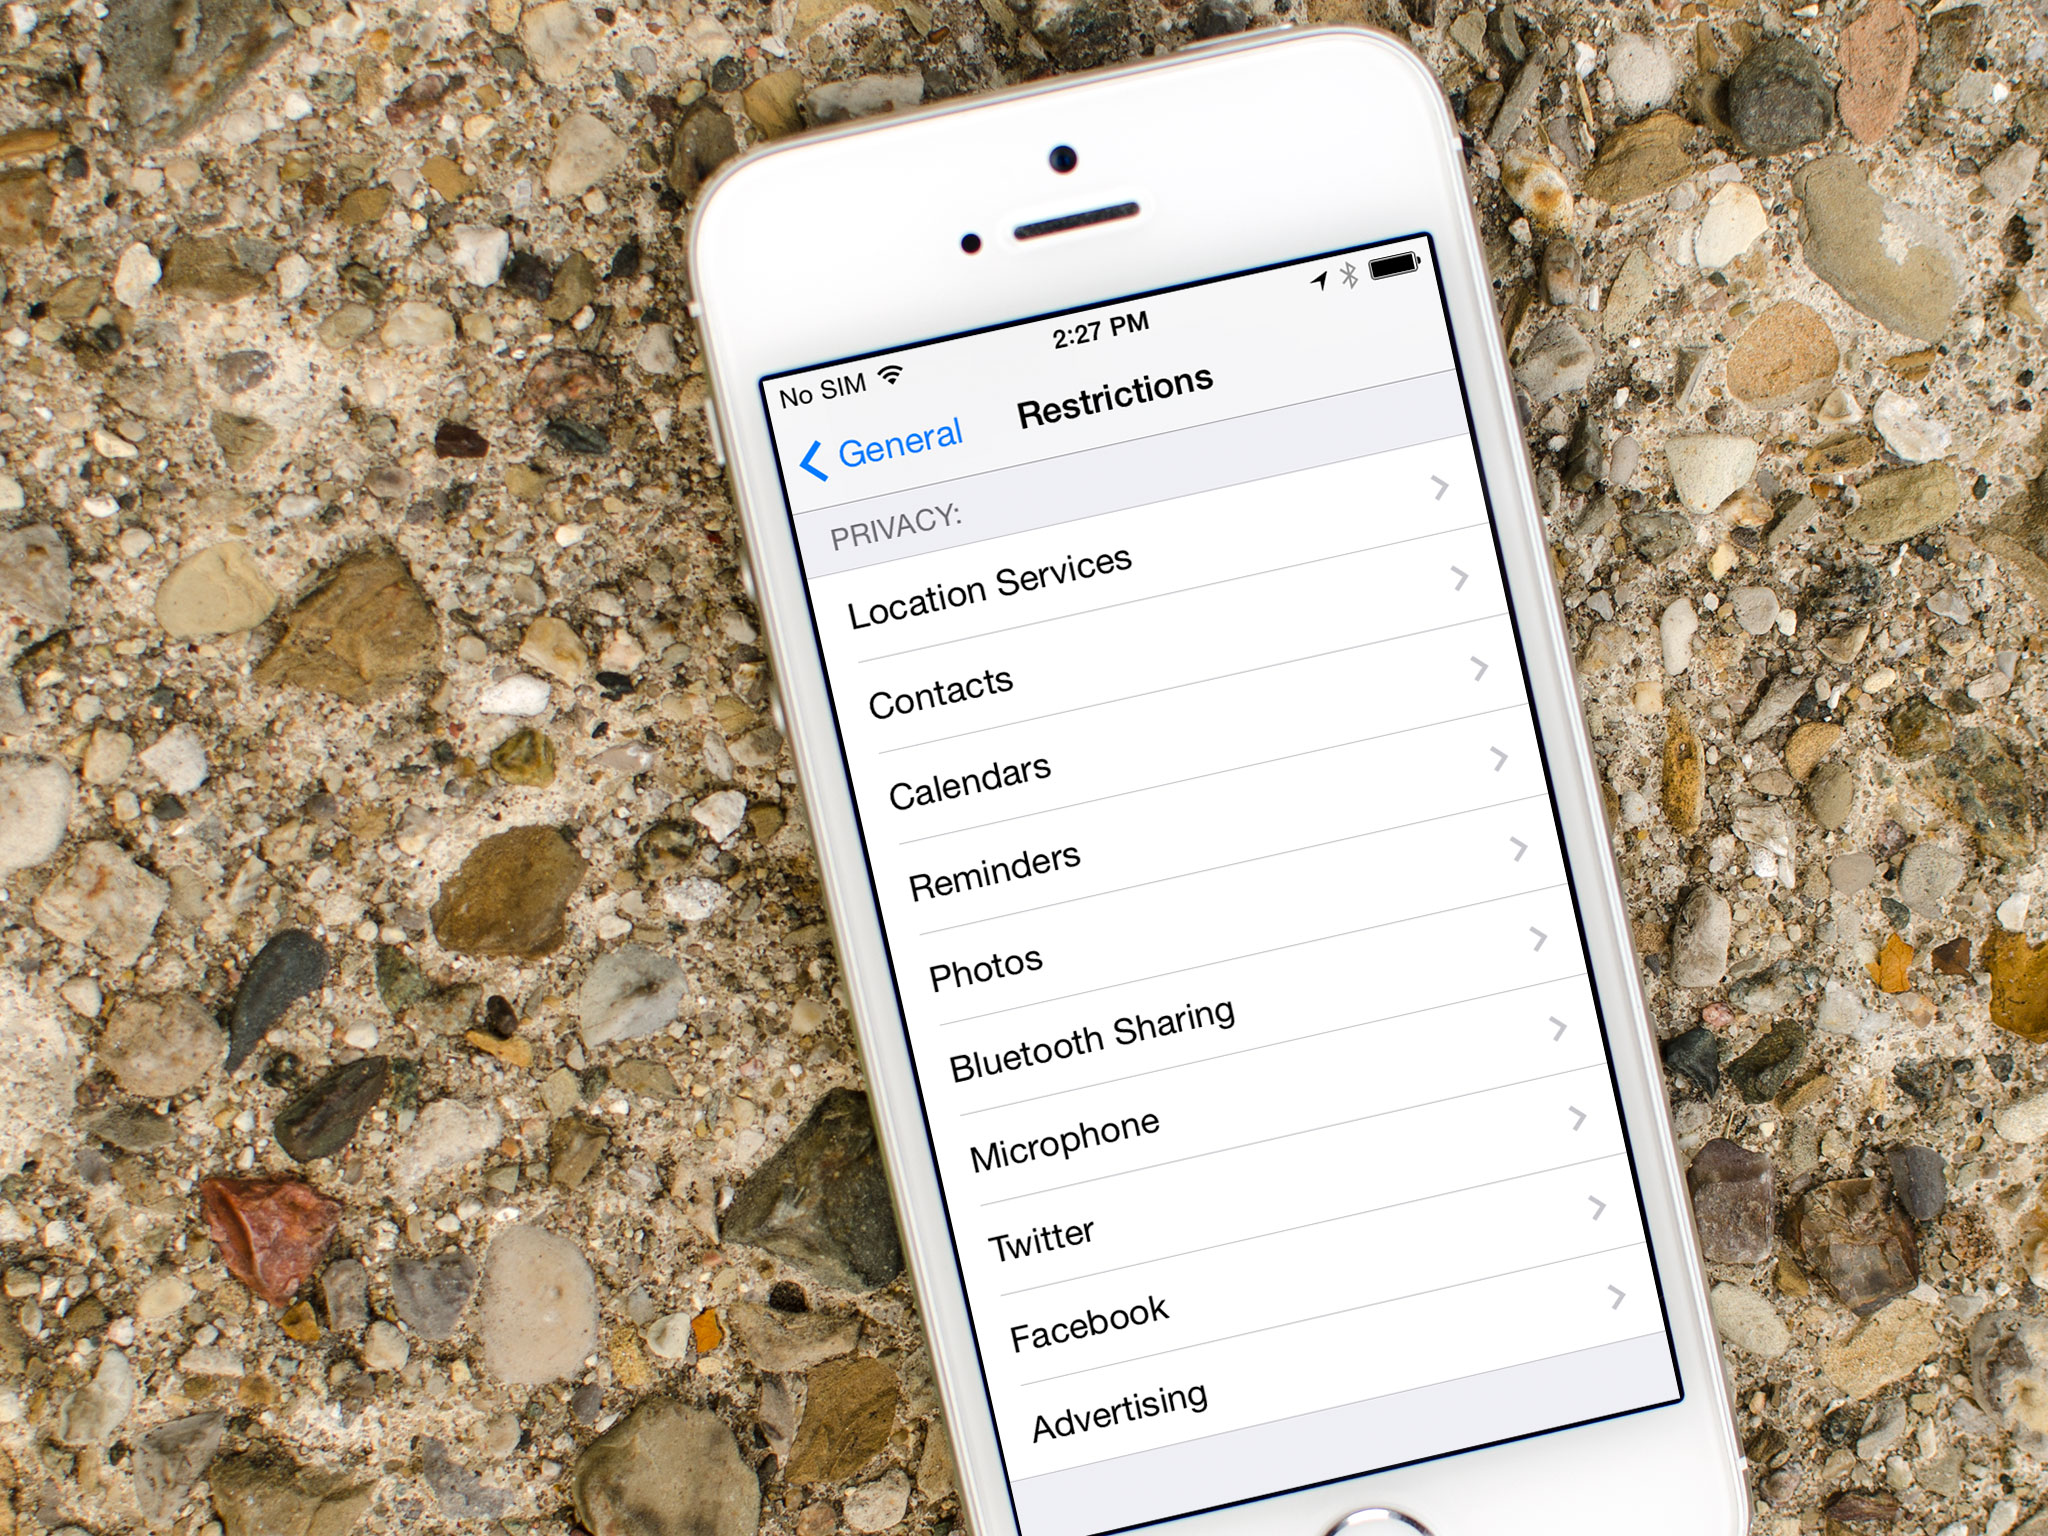 How to restrict private data access with parental controls on your iPhone or iPad